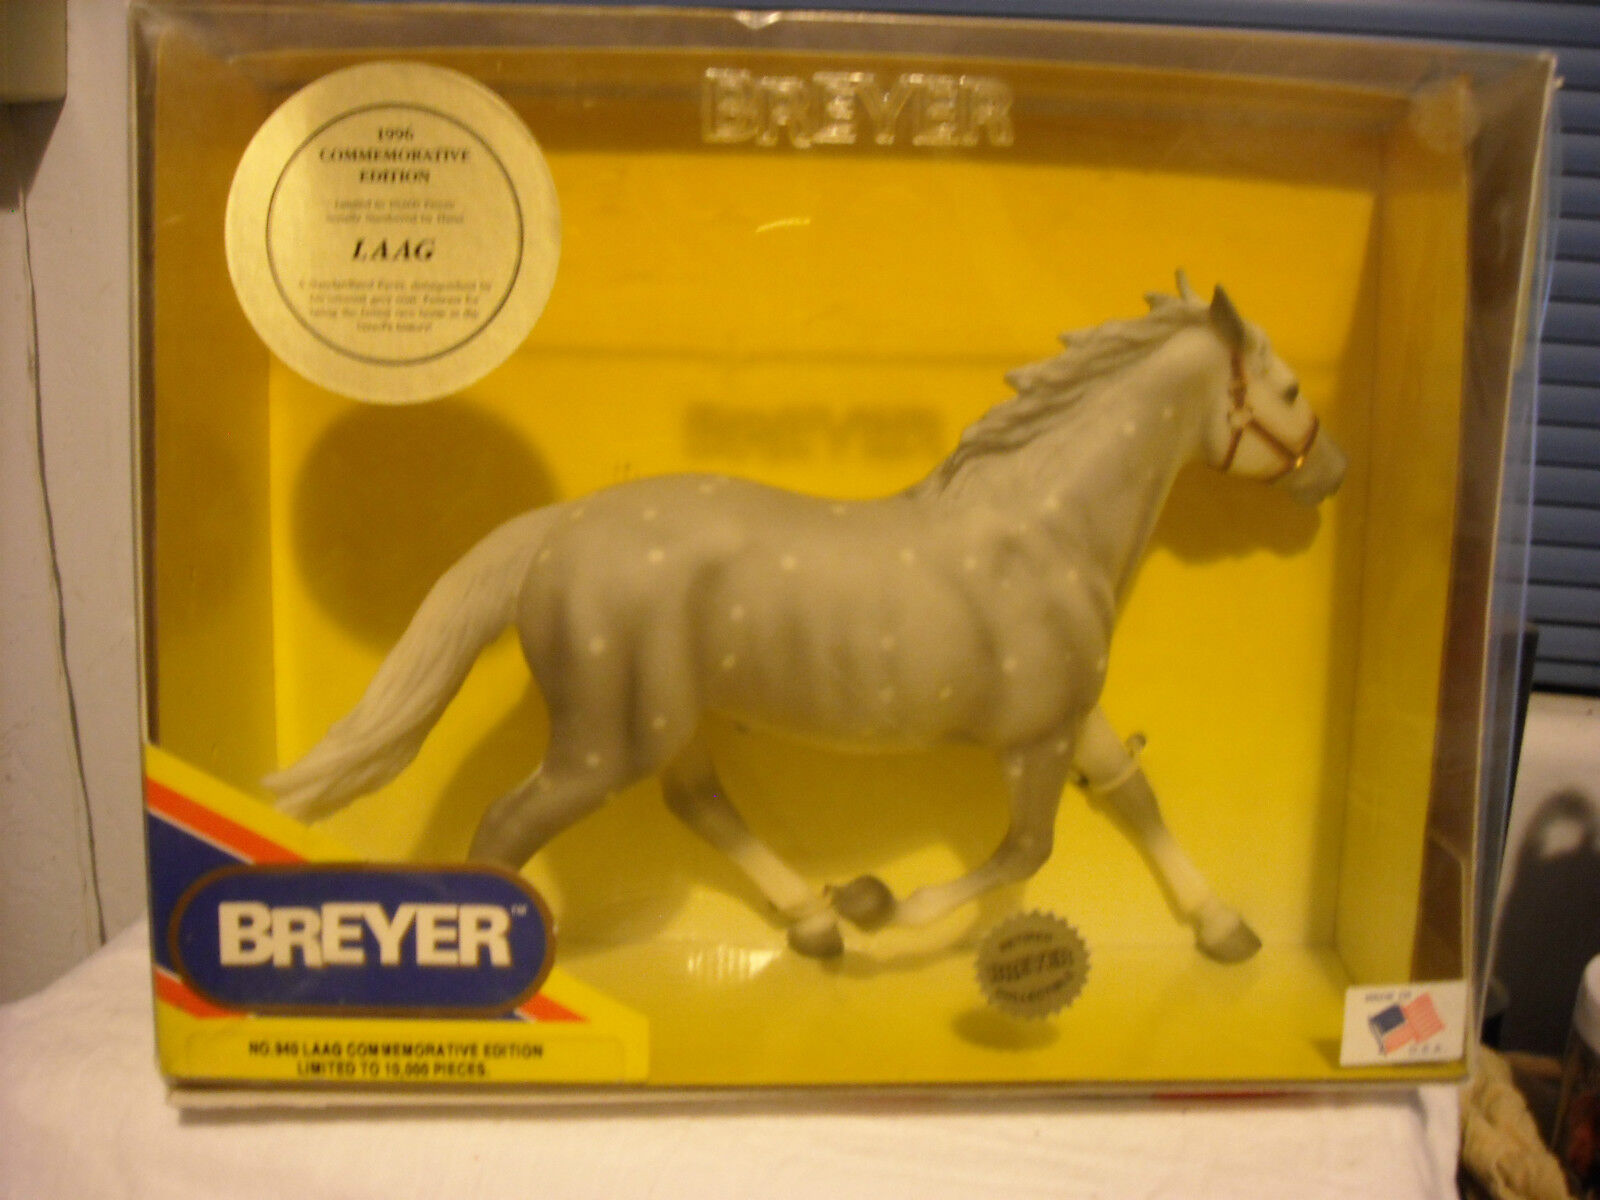 BREYER #940 LAAG~~STANDARDBRED PACER, 1996 COMMEMORATIVE EDITION~10,000 PIECES